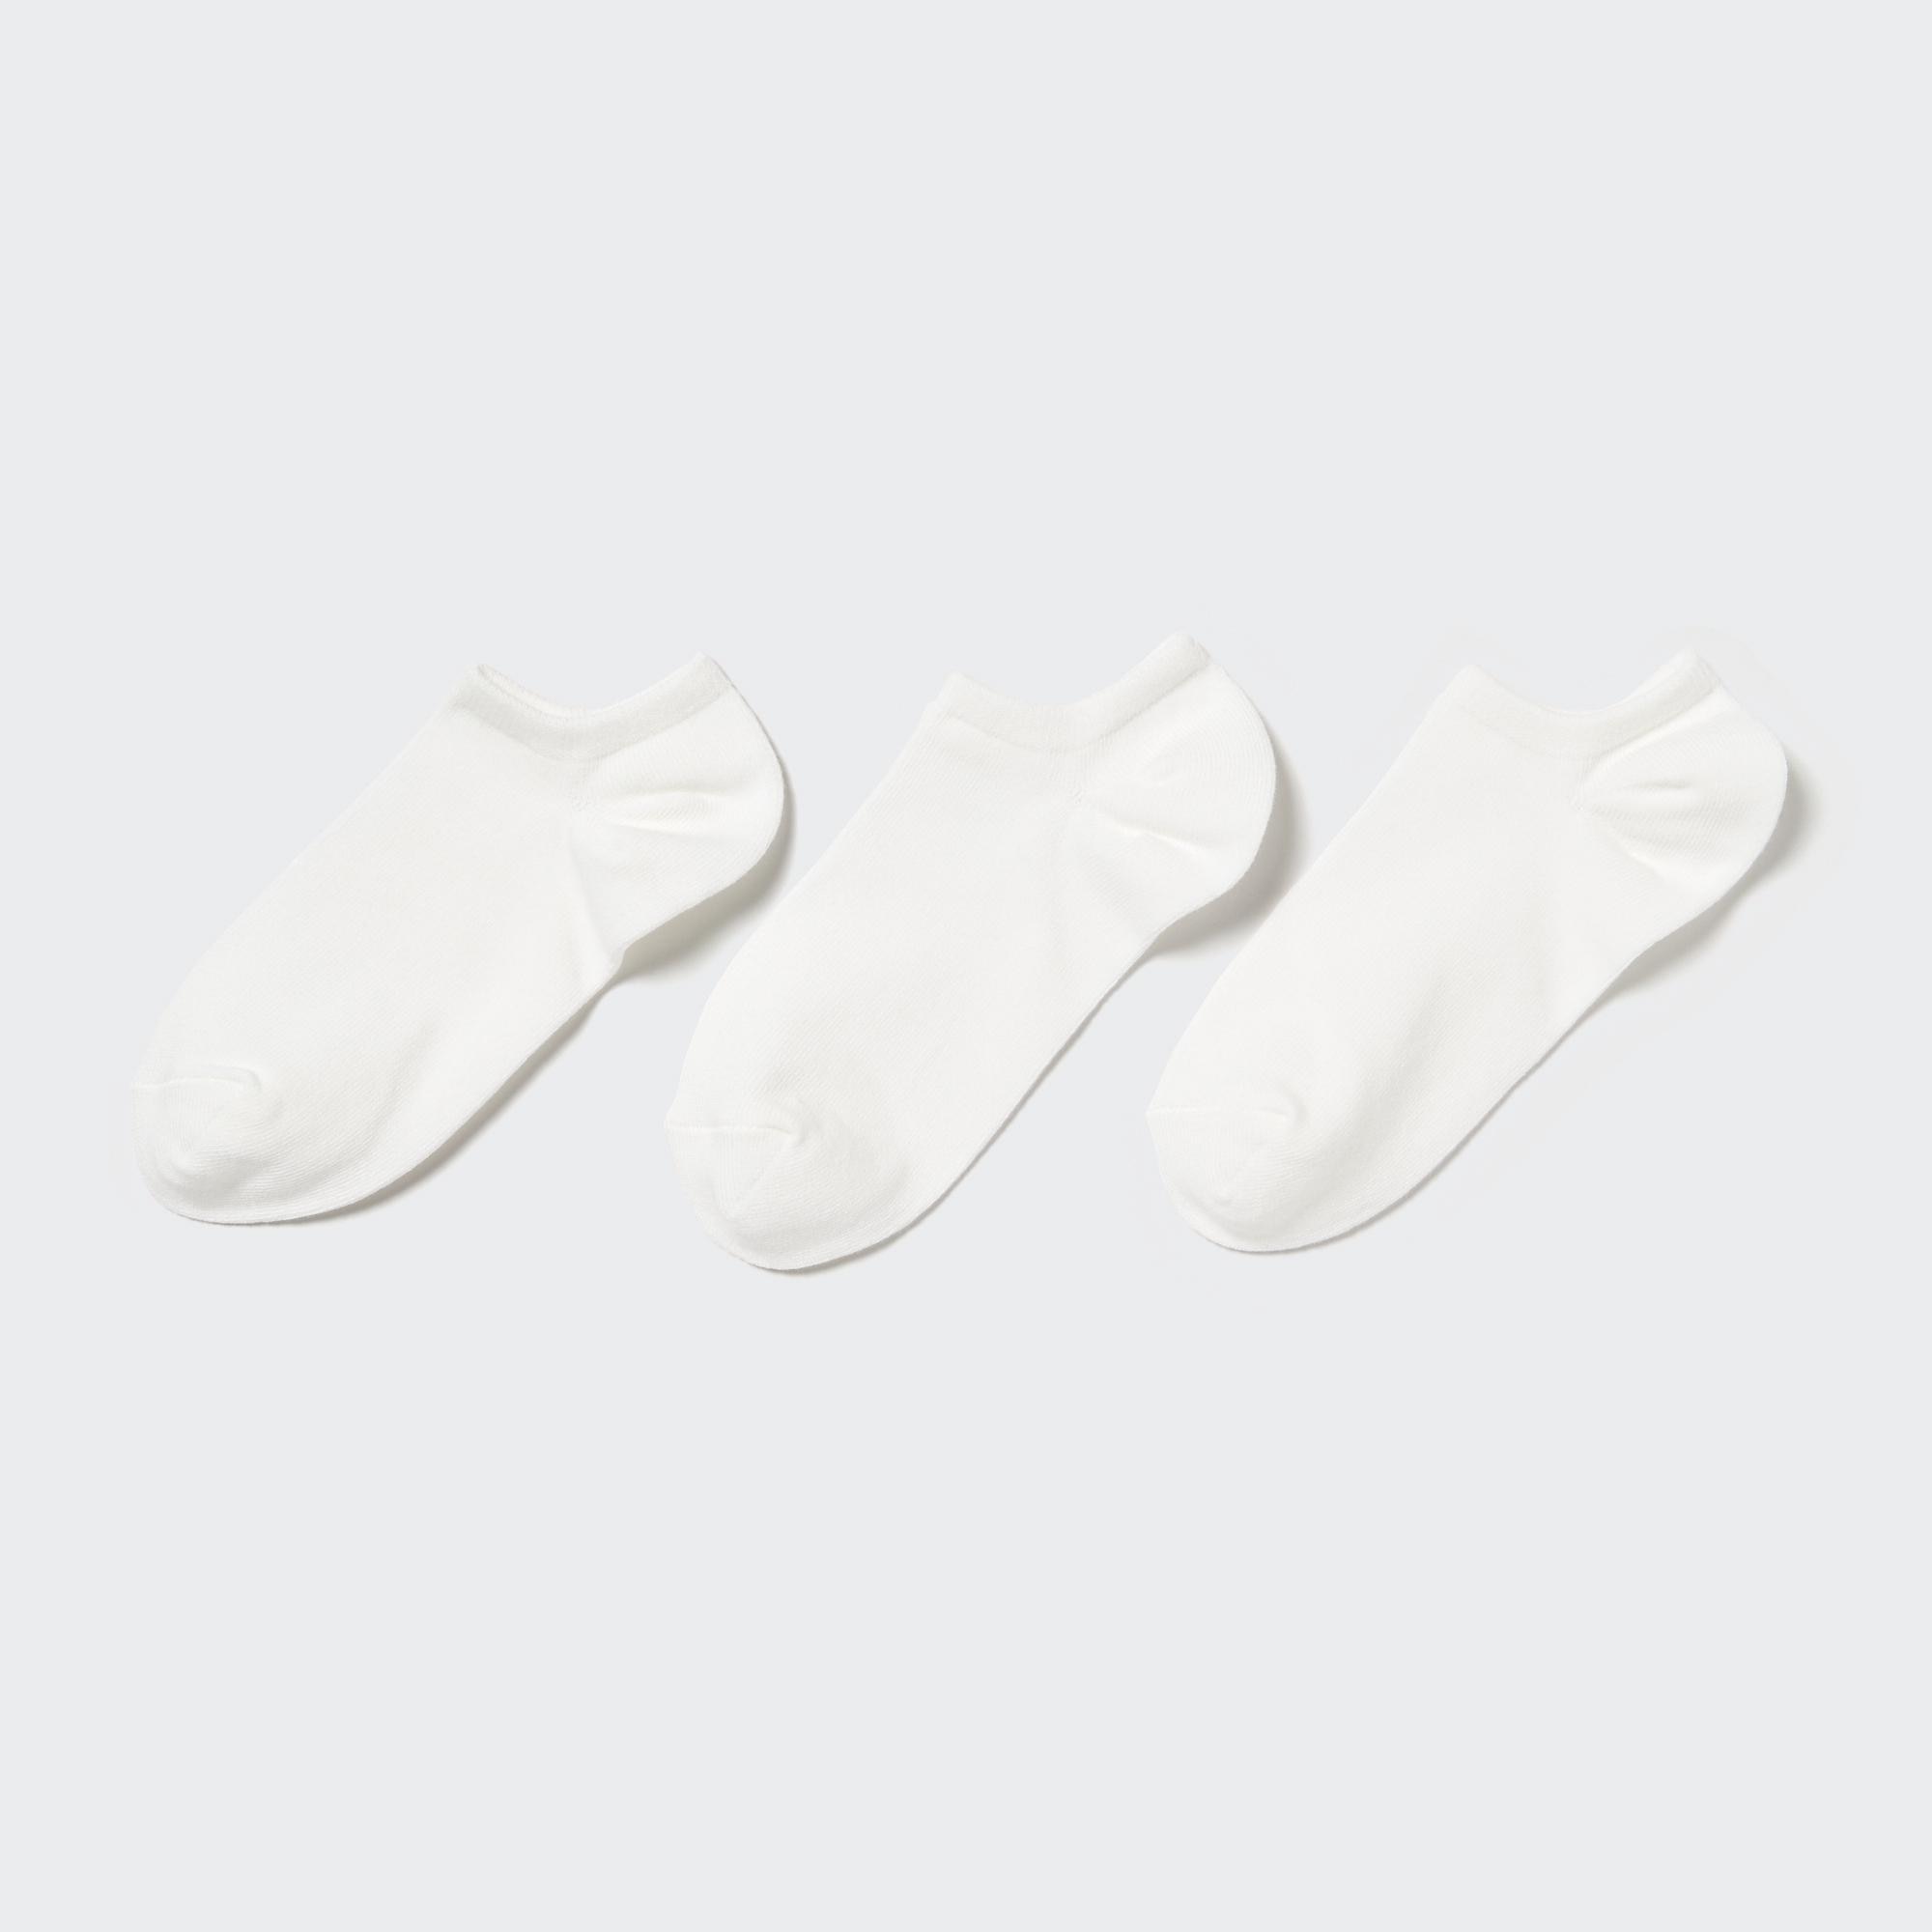 Shop Women's White Toe Socks for Comfy Toes